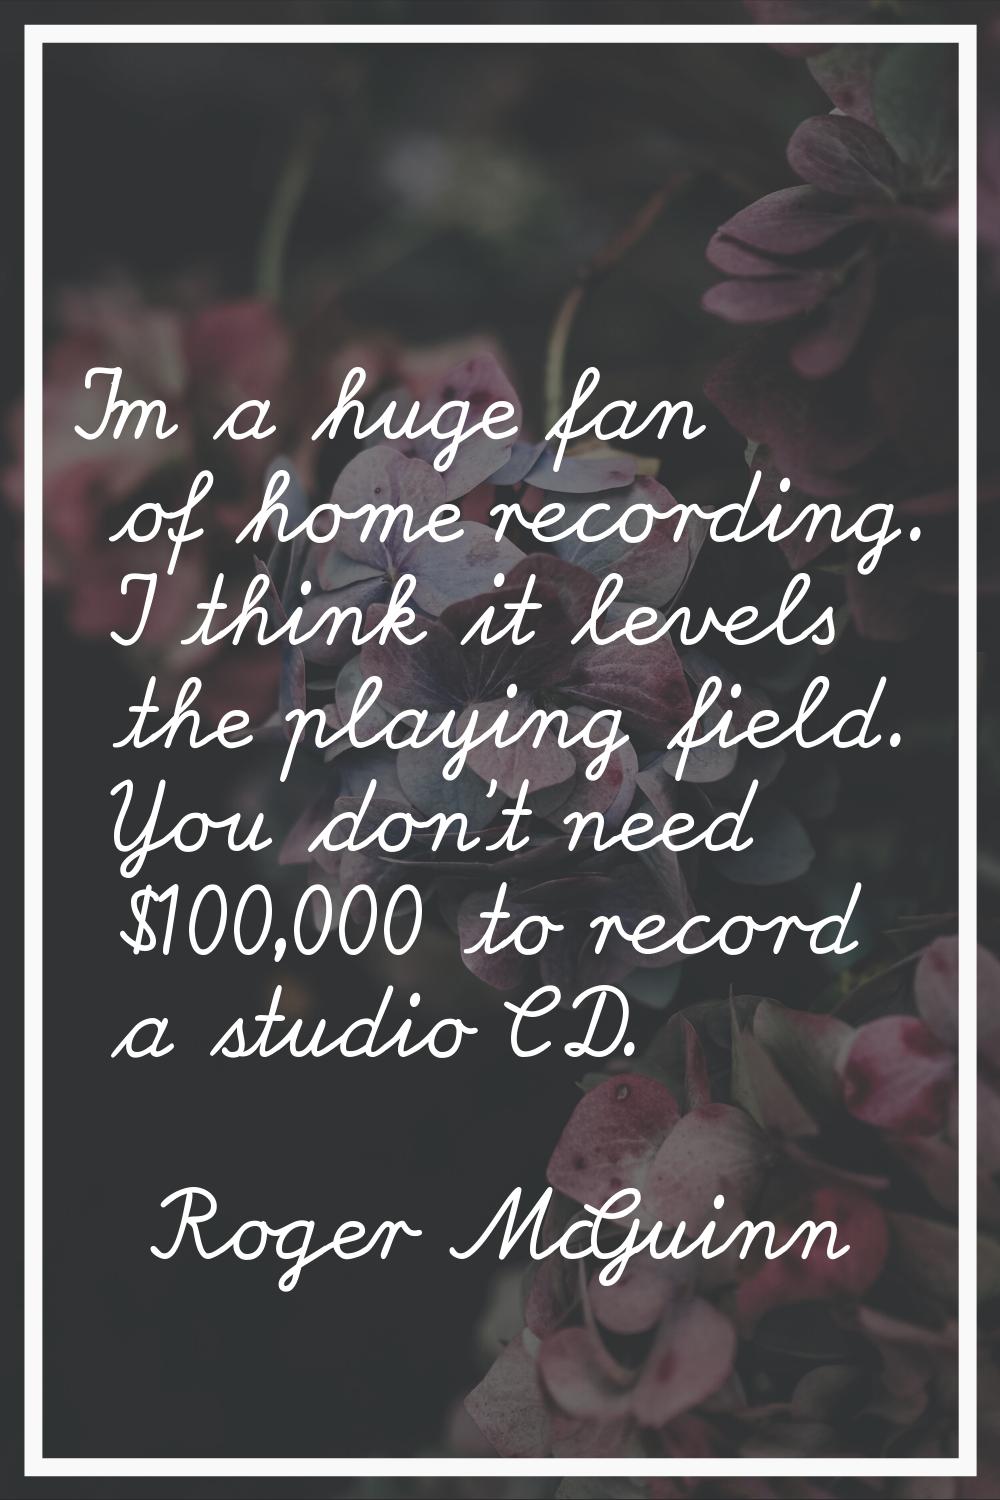 I'm a huge fan of home recording. I think it levels the playing field. You don't need $100,000 to r